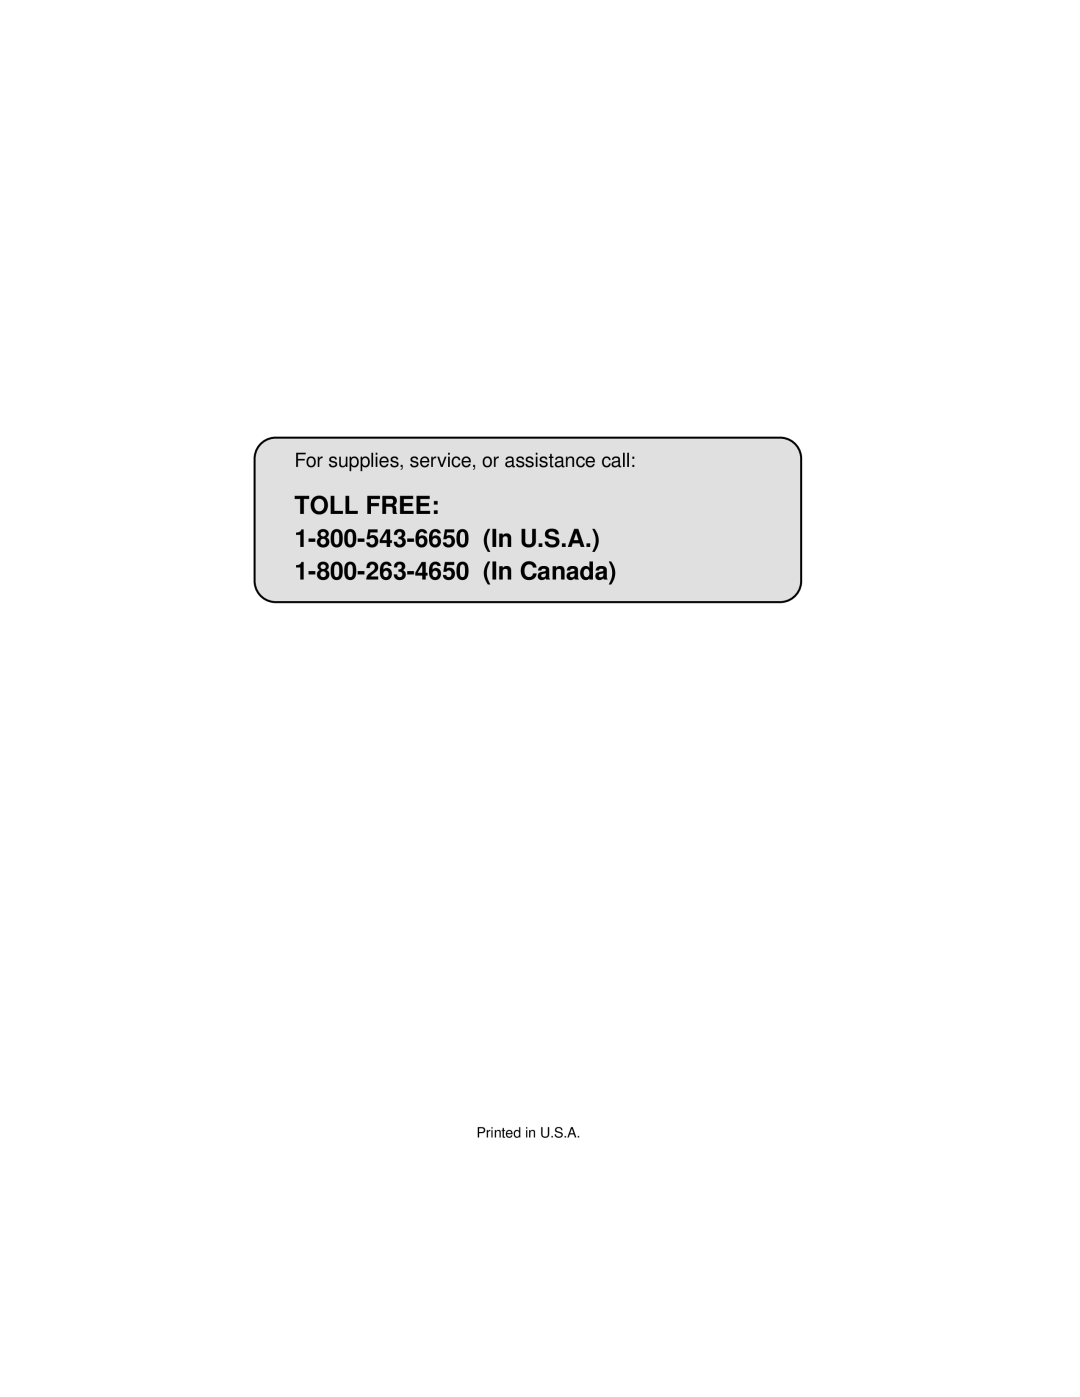 Paxar 9445 manual Toll Free, For supplies, service, or assistance call, Printed in U.S.A 